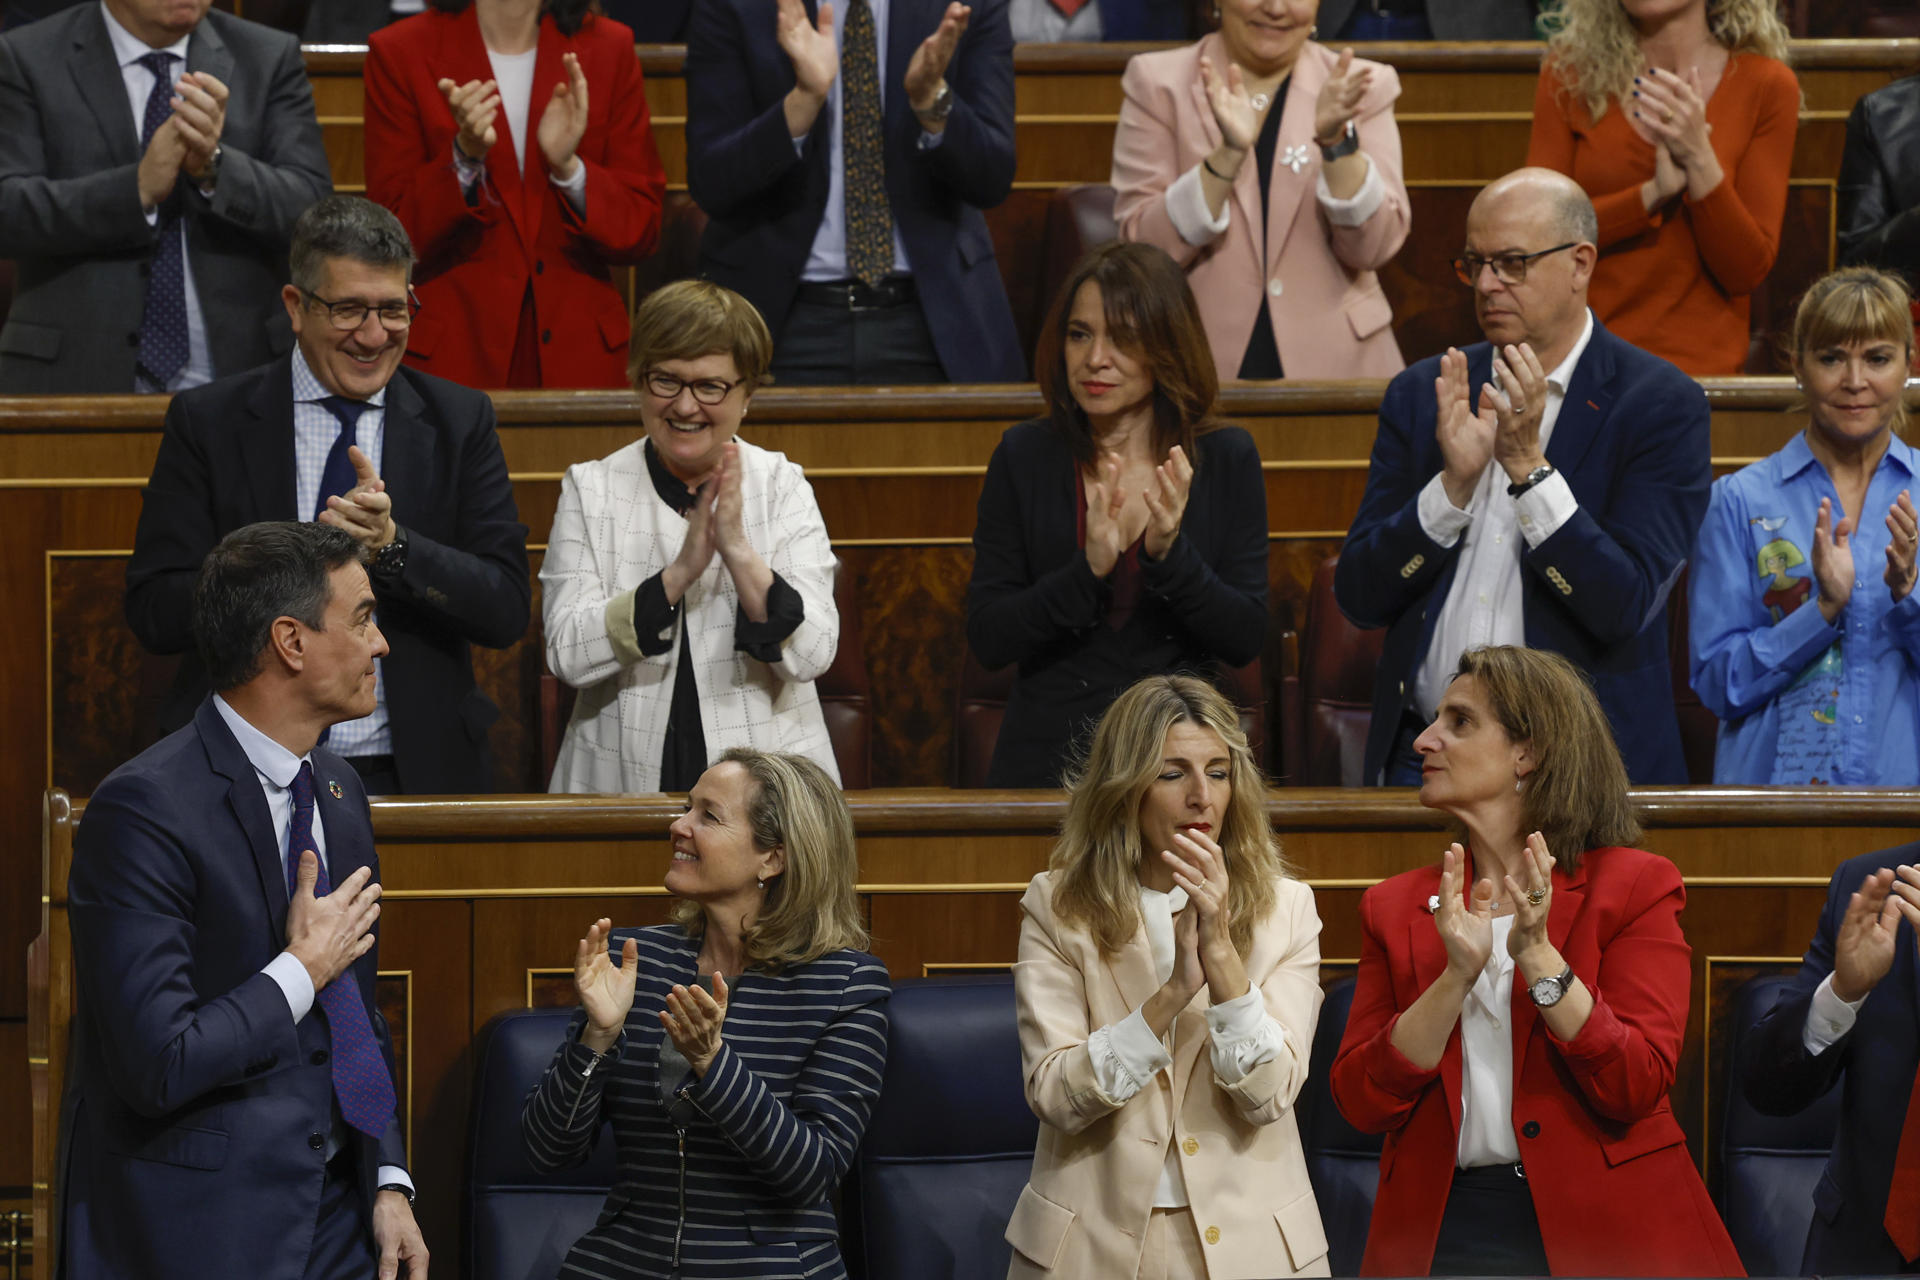 Socialist MPs applaud Spanish Prime Minister Pedro Sanchez after his intervention during the last day of the debate of the vote of no confidence against Pedro Sanchez at the Lower House in Madrid, Spain, 22 March 2023. EFE/ J.J. Guillen